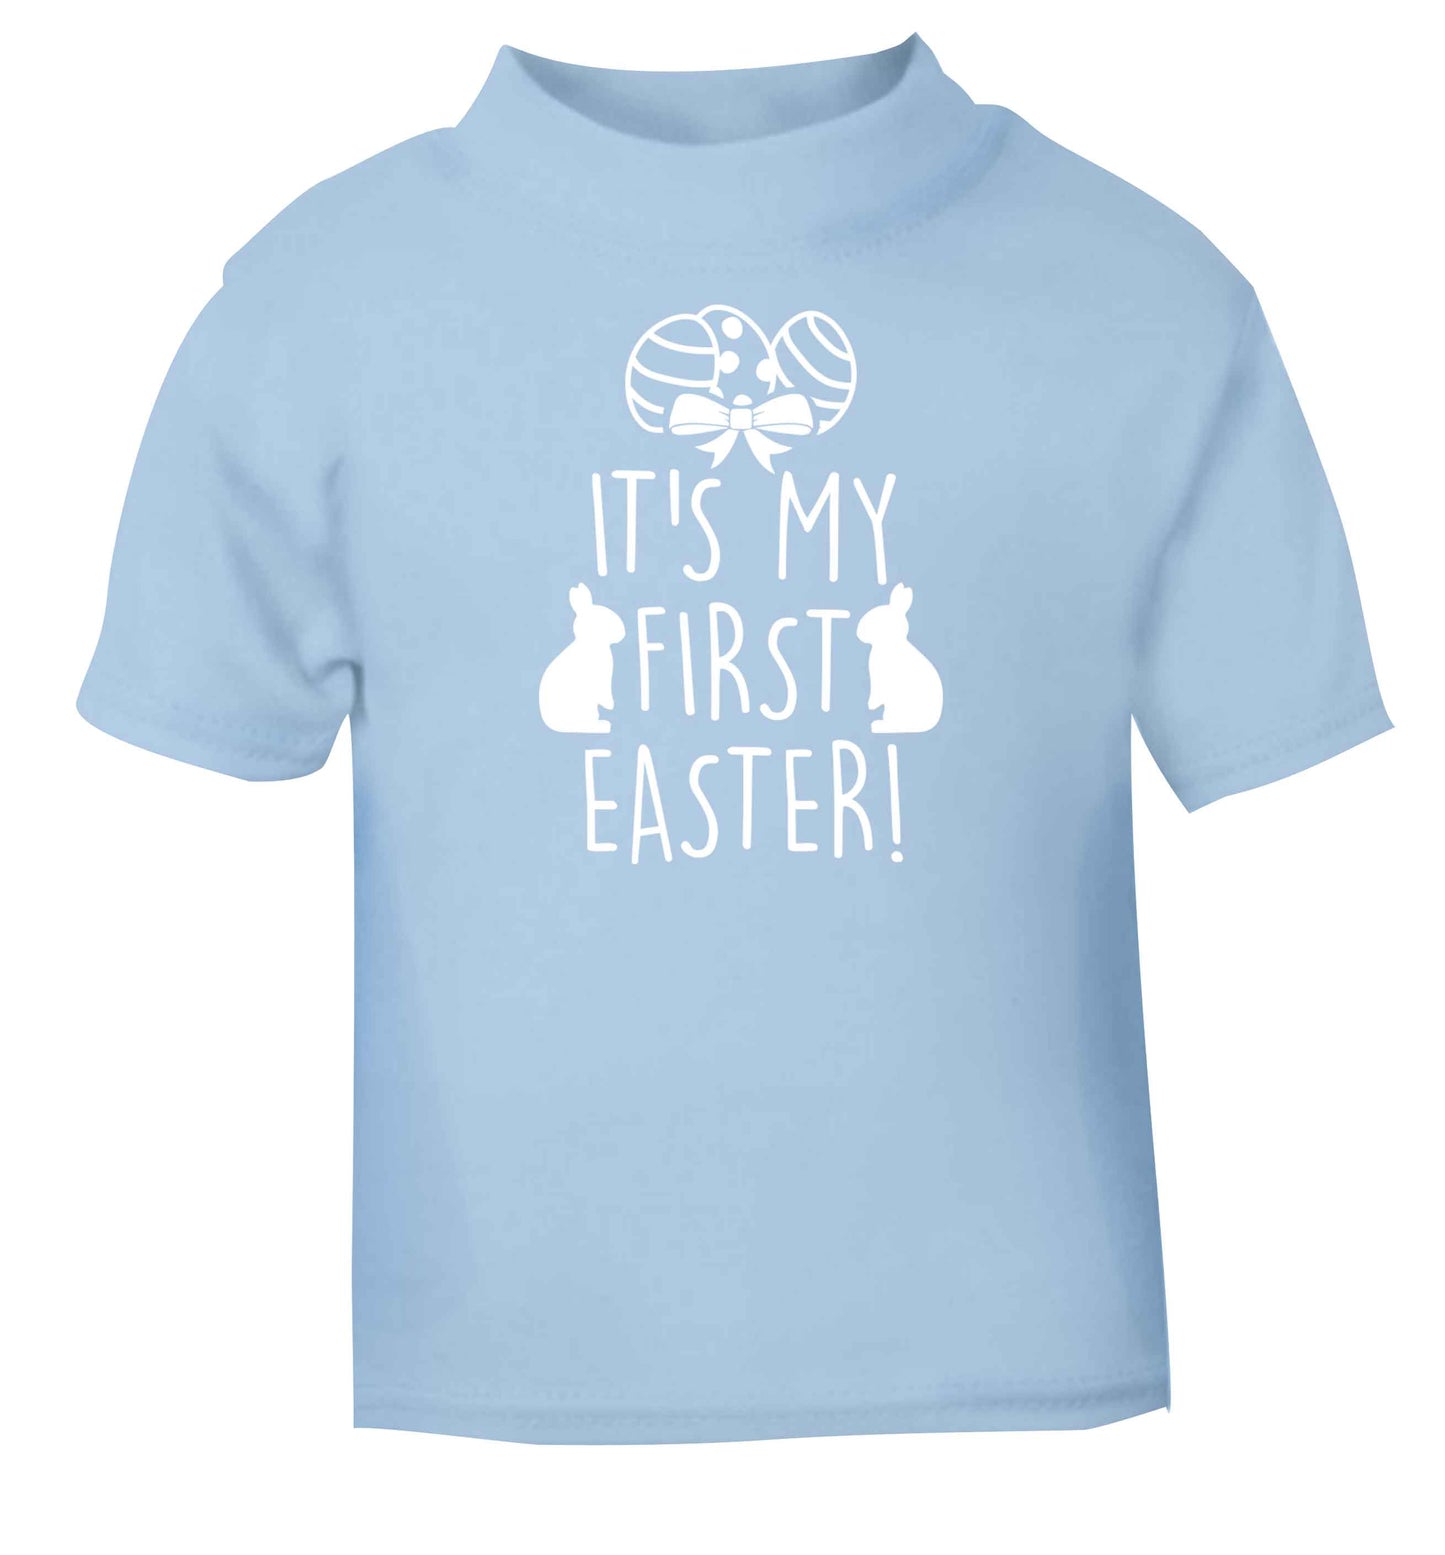 It's my first Easter light blue baby toddler Tshirt 2 Years